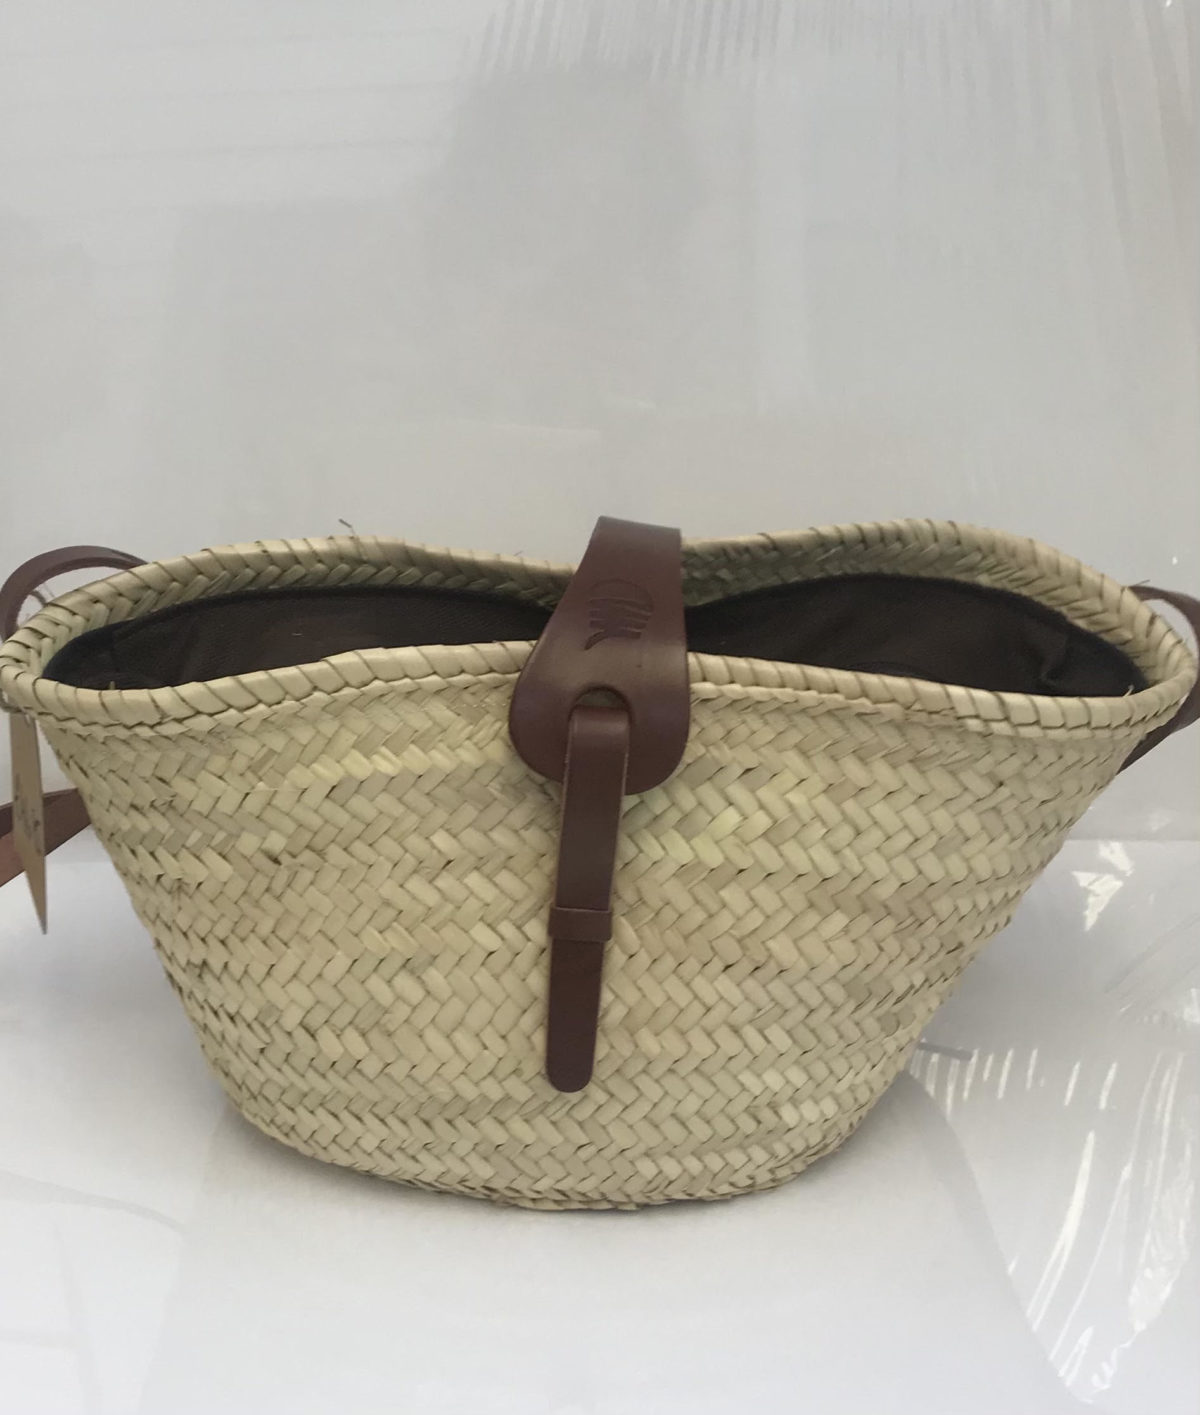 woven crossbody bag with leather strap and closure